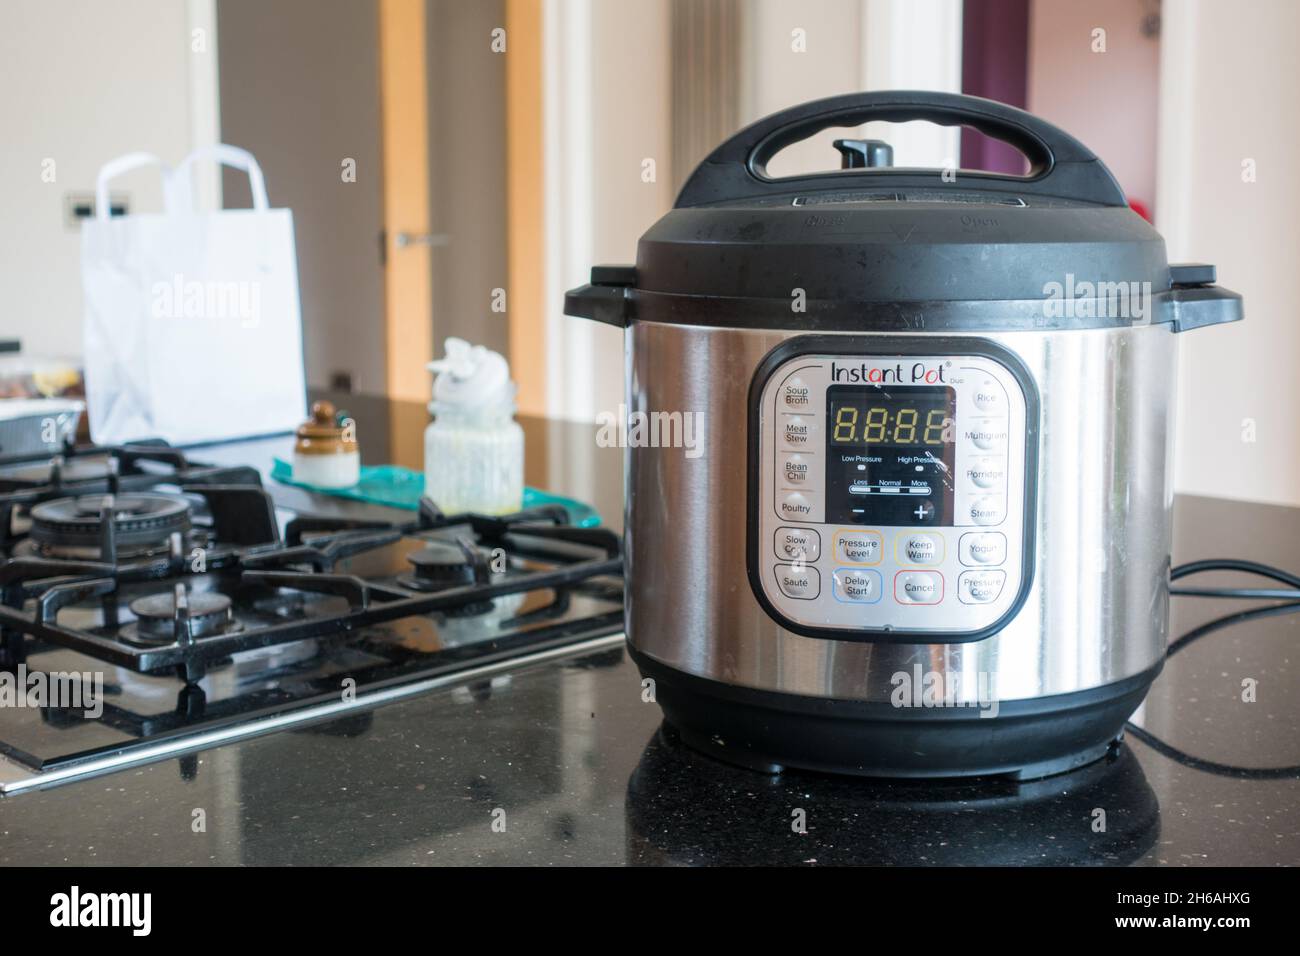 Instant Pot cooking appliance on a kitchen top Stock Photo